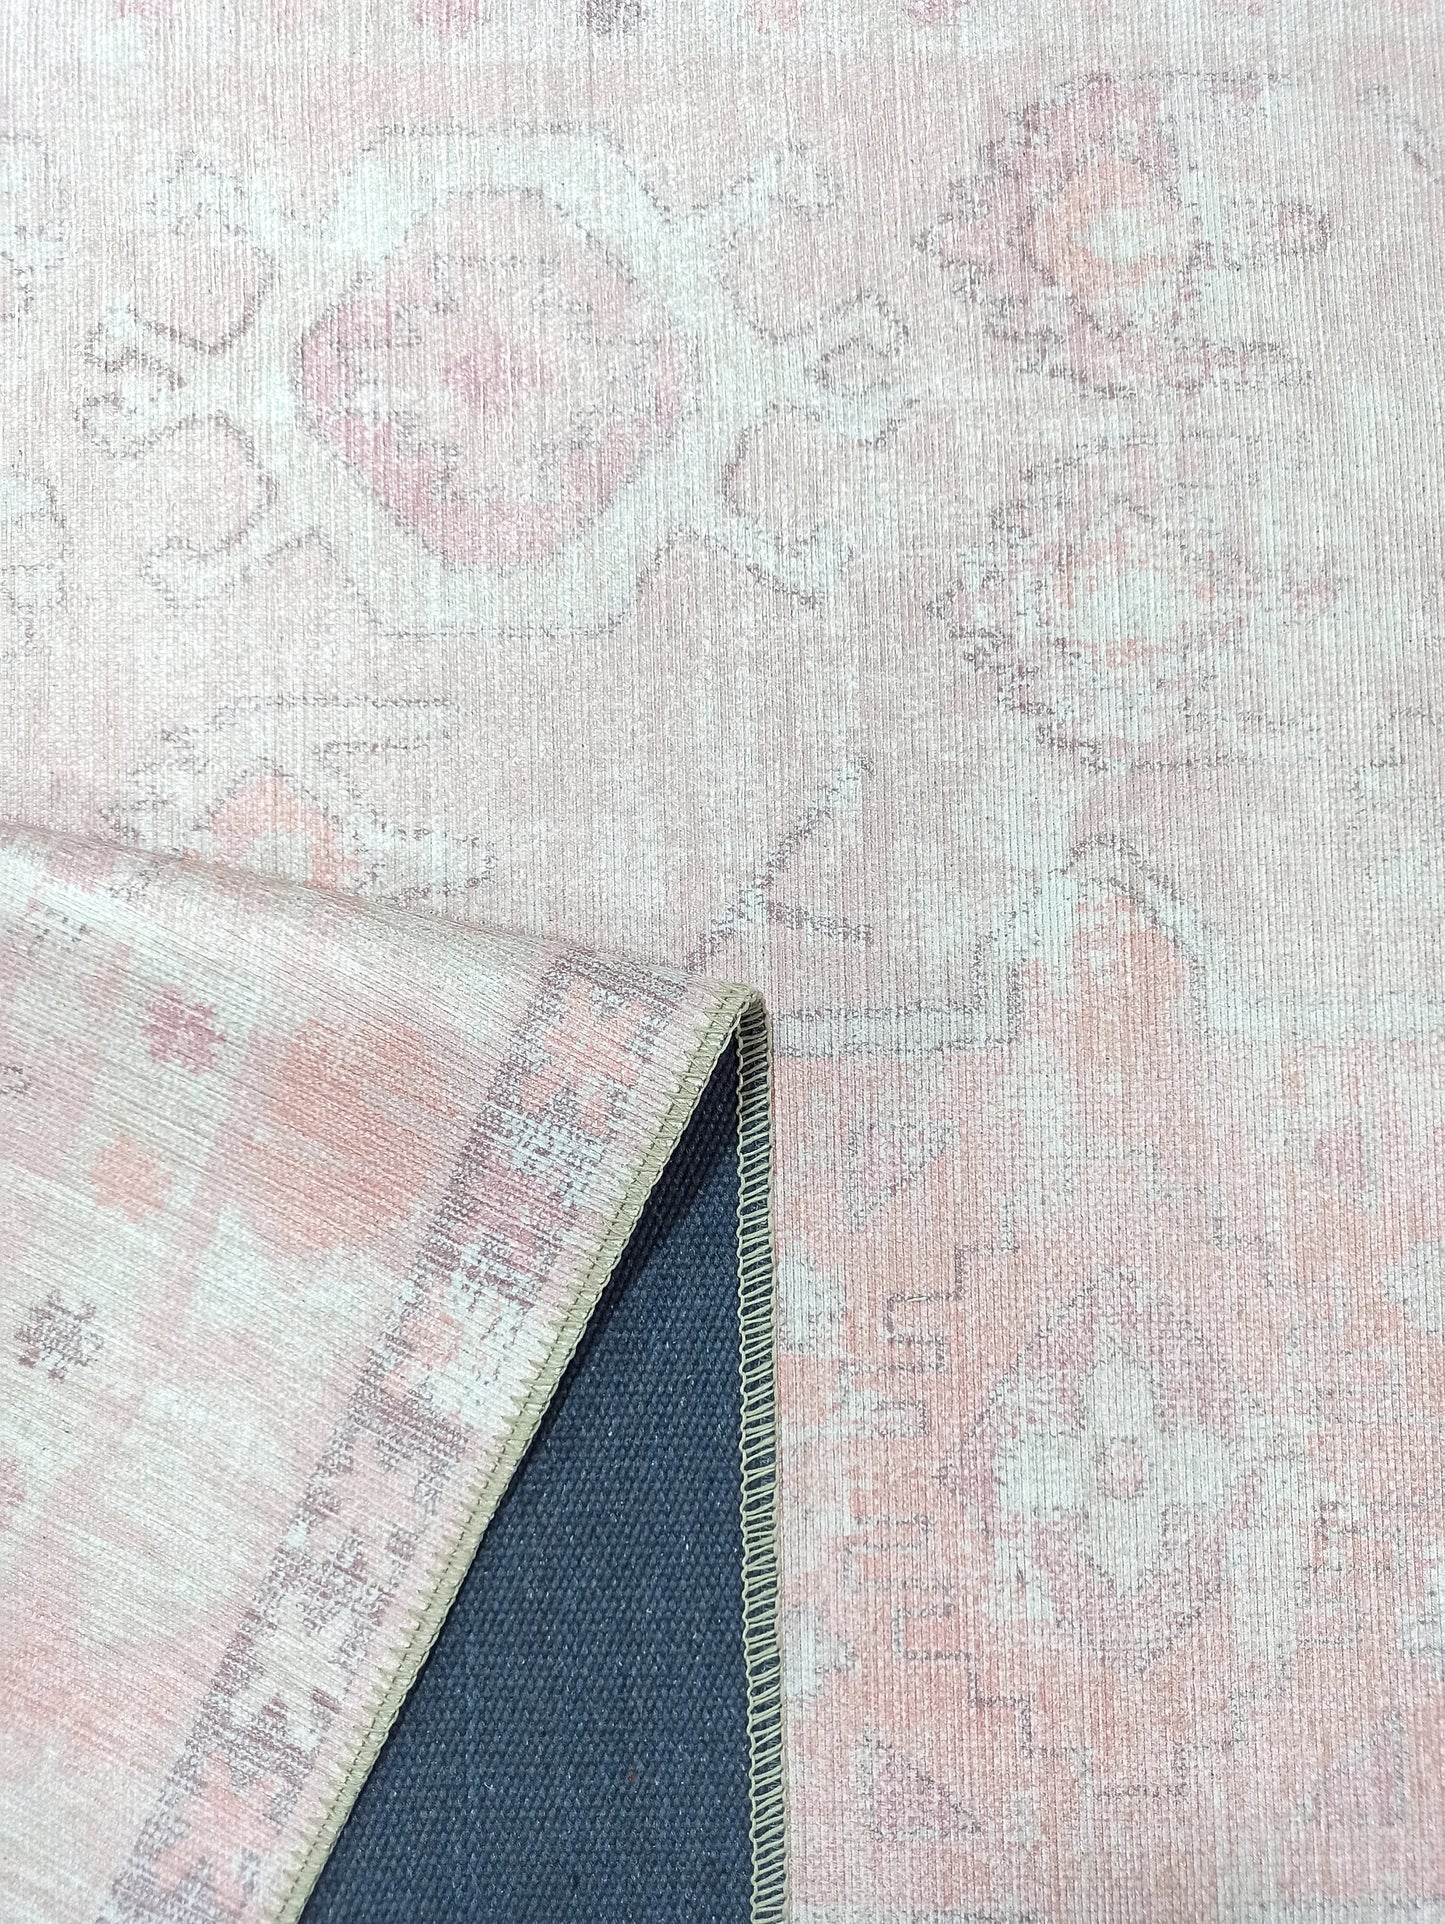 Persian Vintage Rug, Muted Shades of Pink Pale & Dusty Boho Geometric Antique Inspired Shabby Chic Modern Area Rugs Living room Bedroom Hall